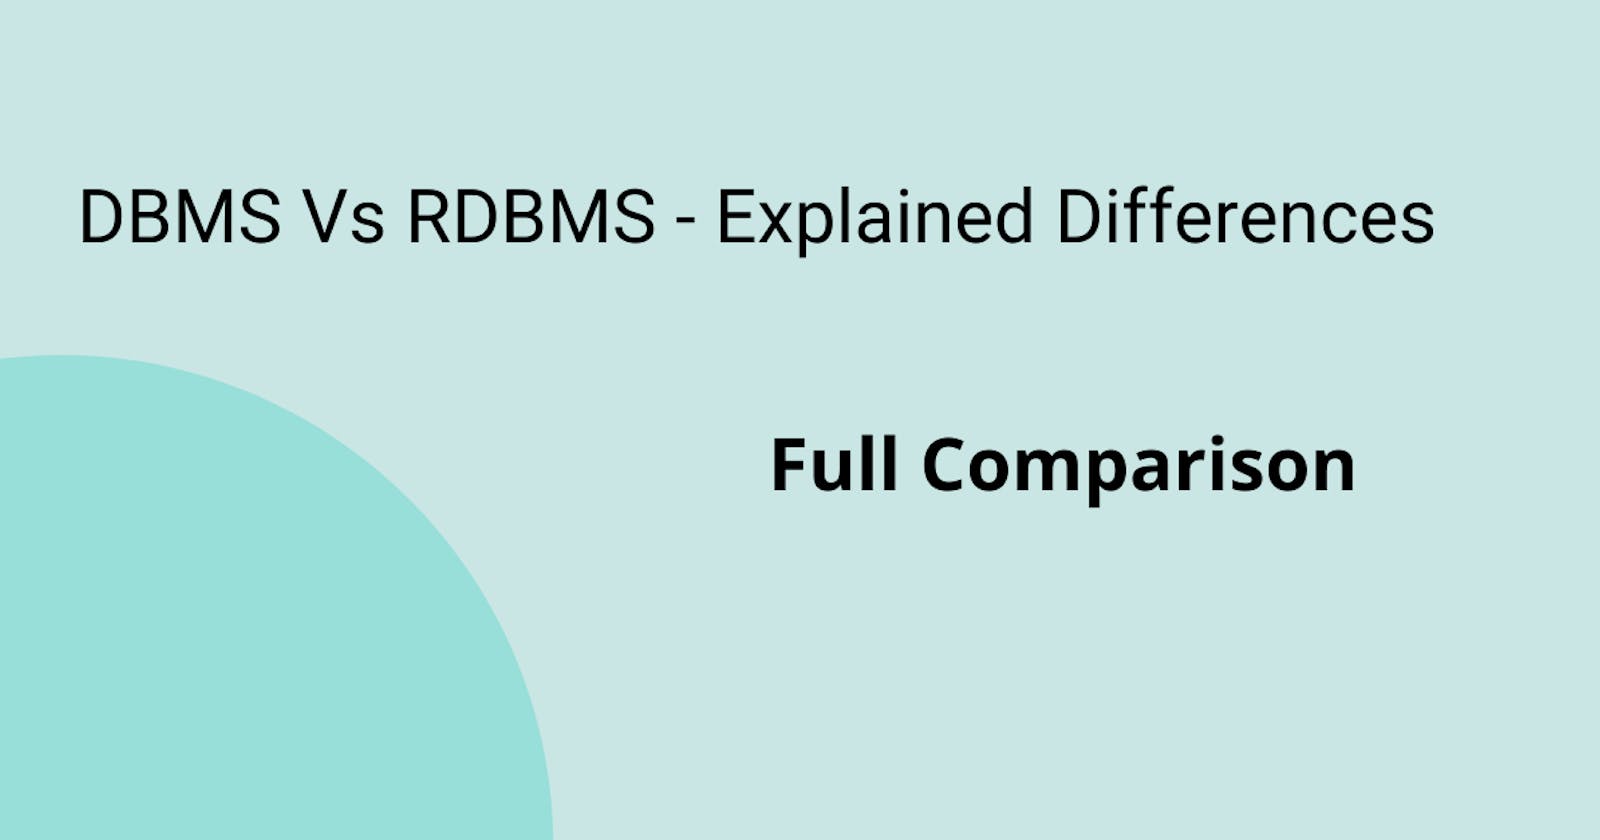 DBMS Vs RDBMS - Explained Differences